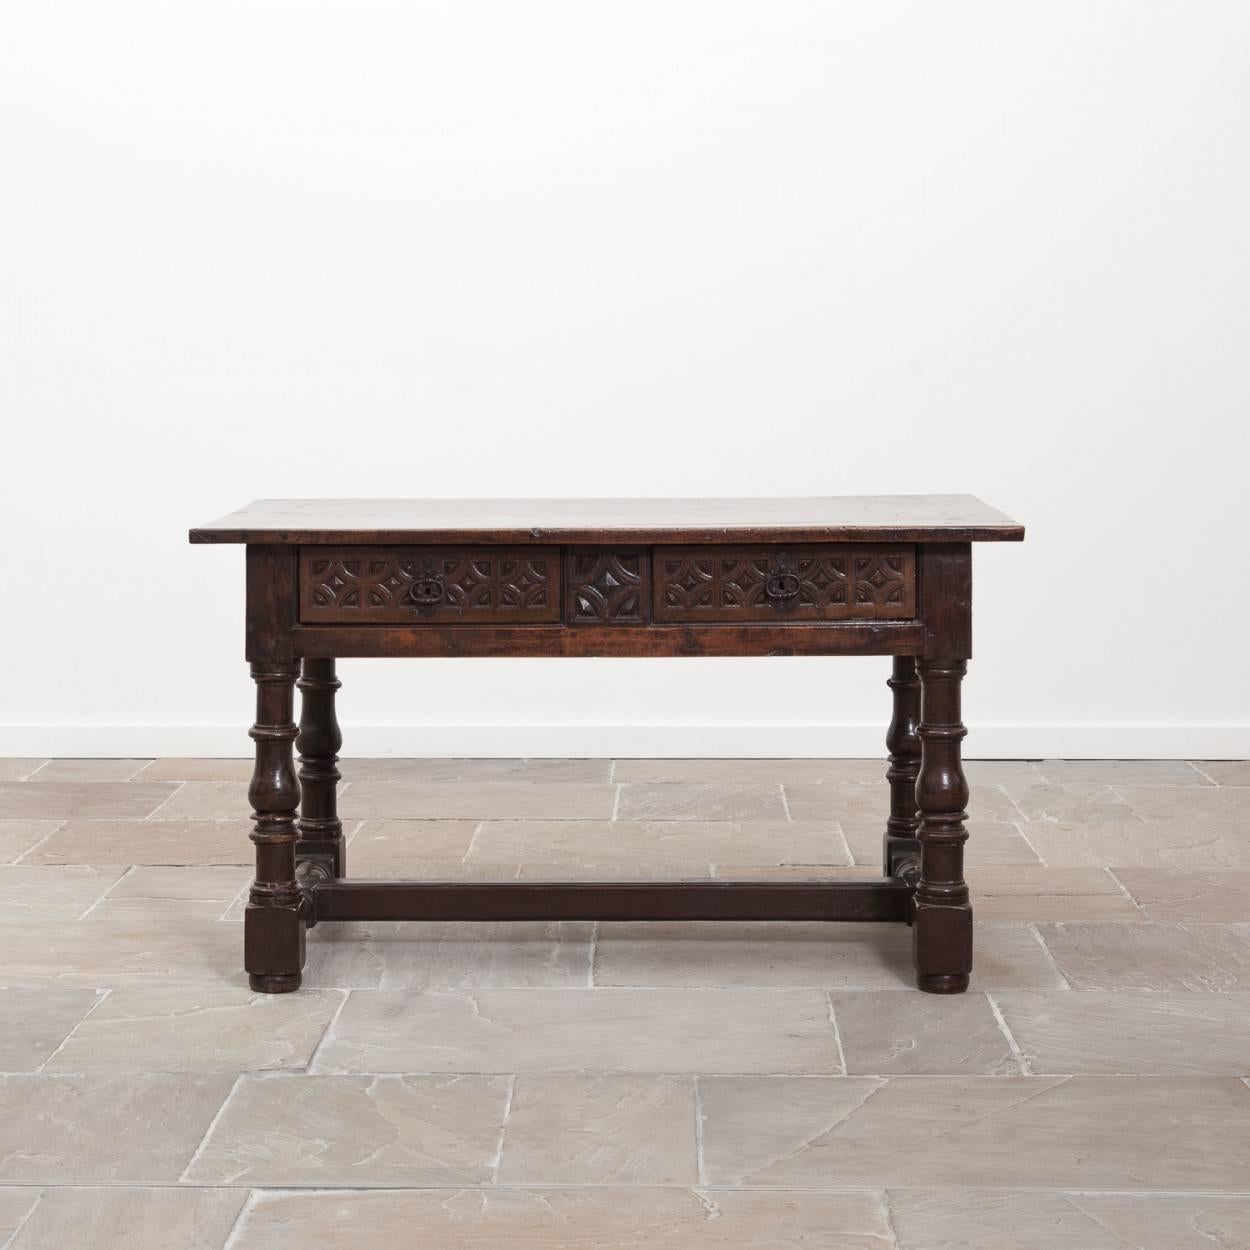 Very handsome 17th century walnut table which has a stunning top with a rich color and patination. This would make an excellent side or deep console table.

We believe the legs and stretcher have been replaced at some point in the tables history,